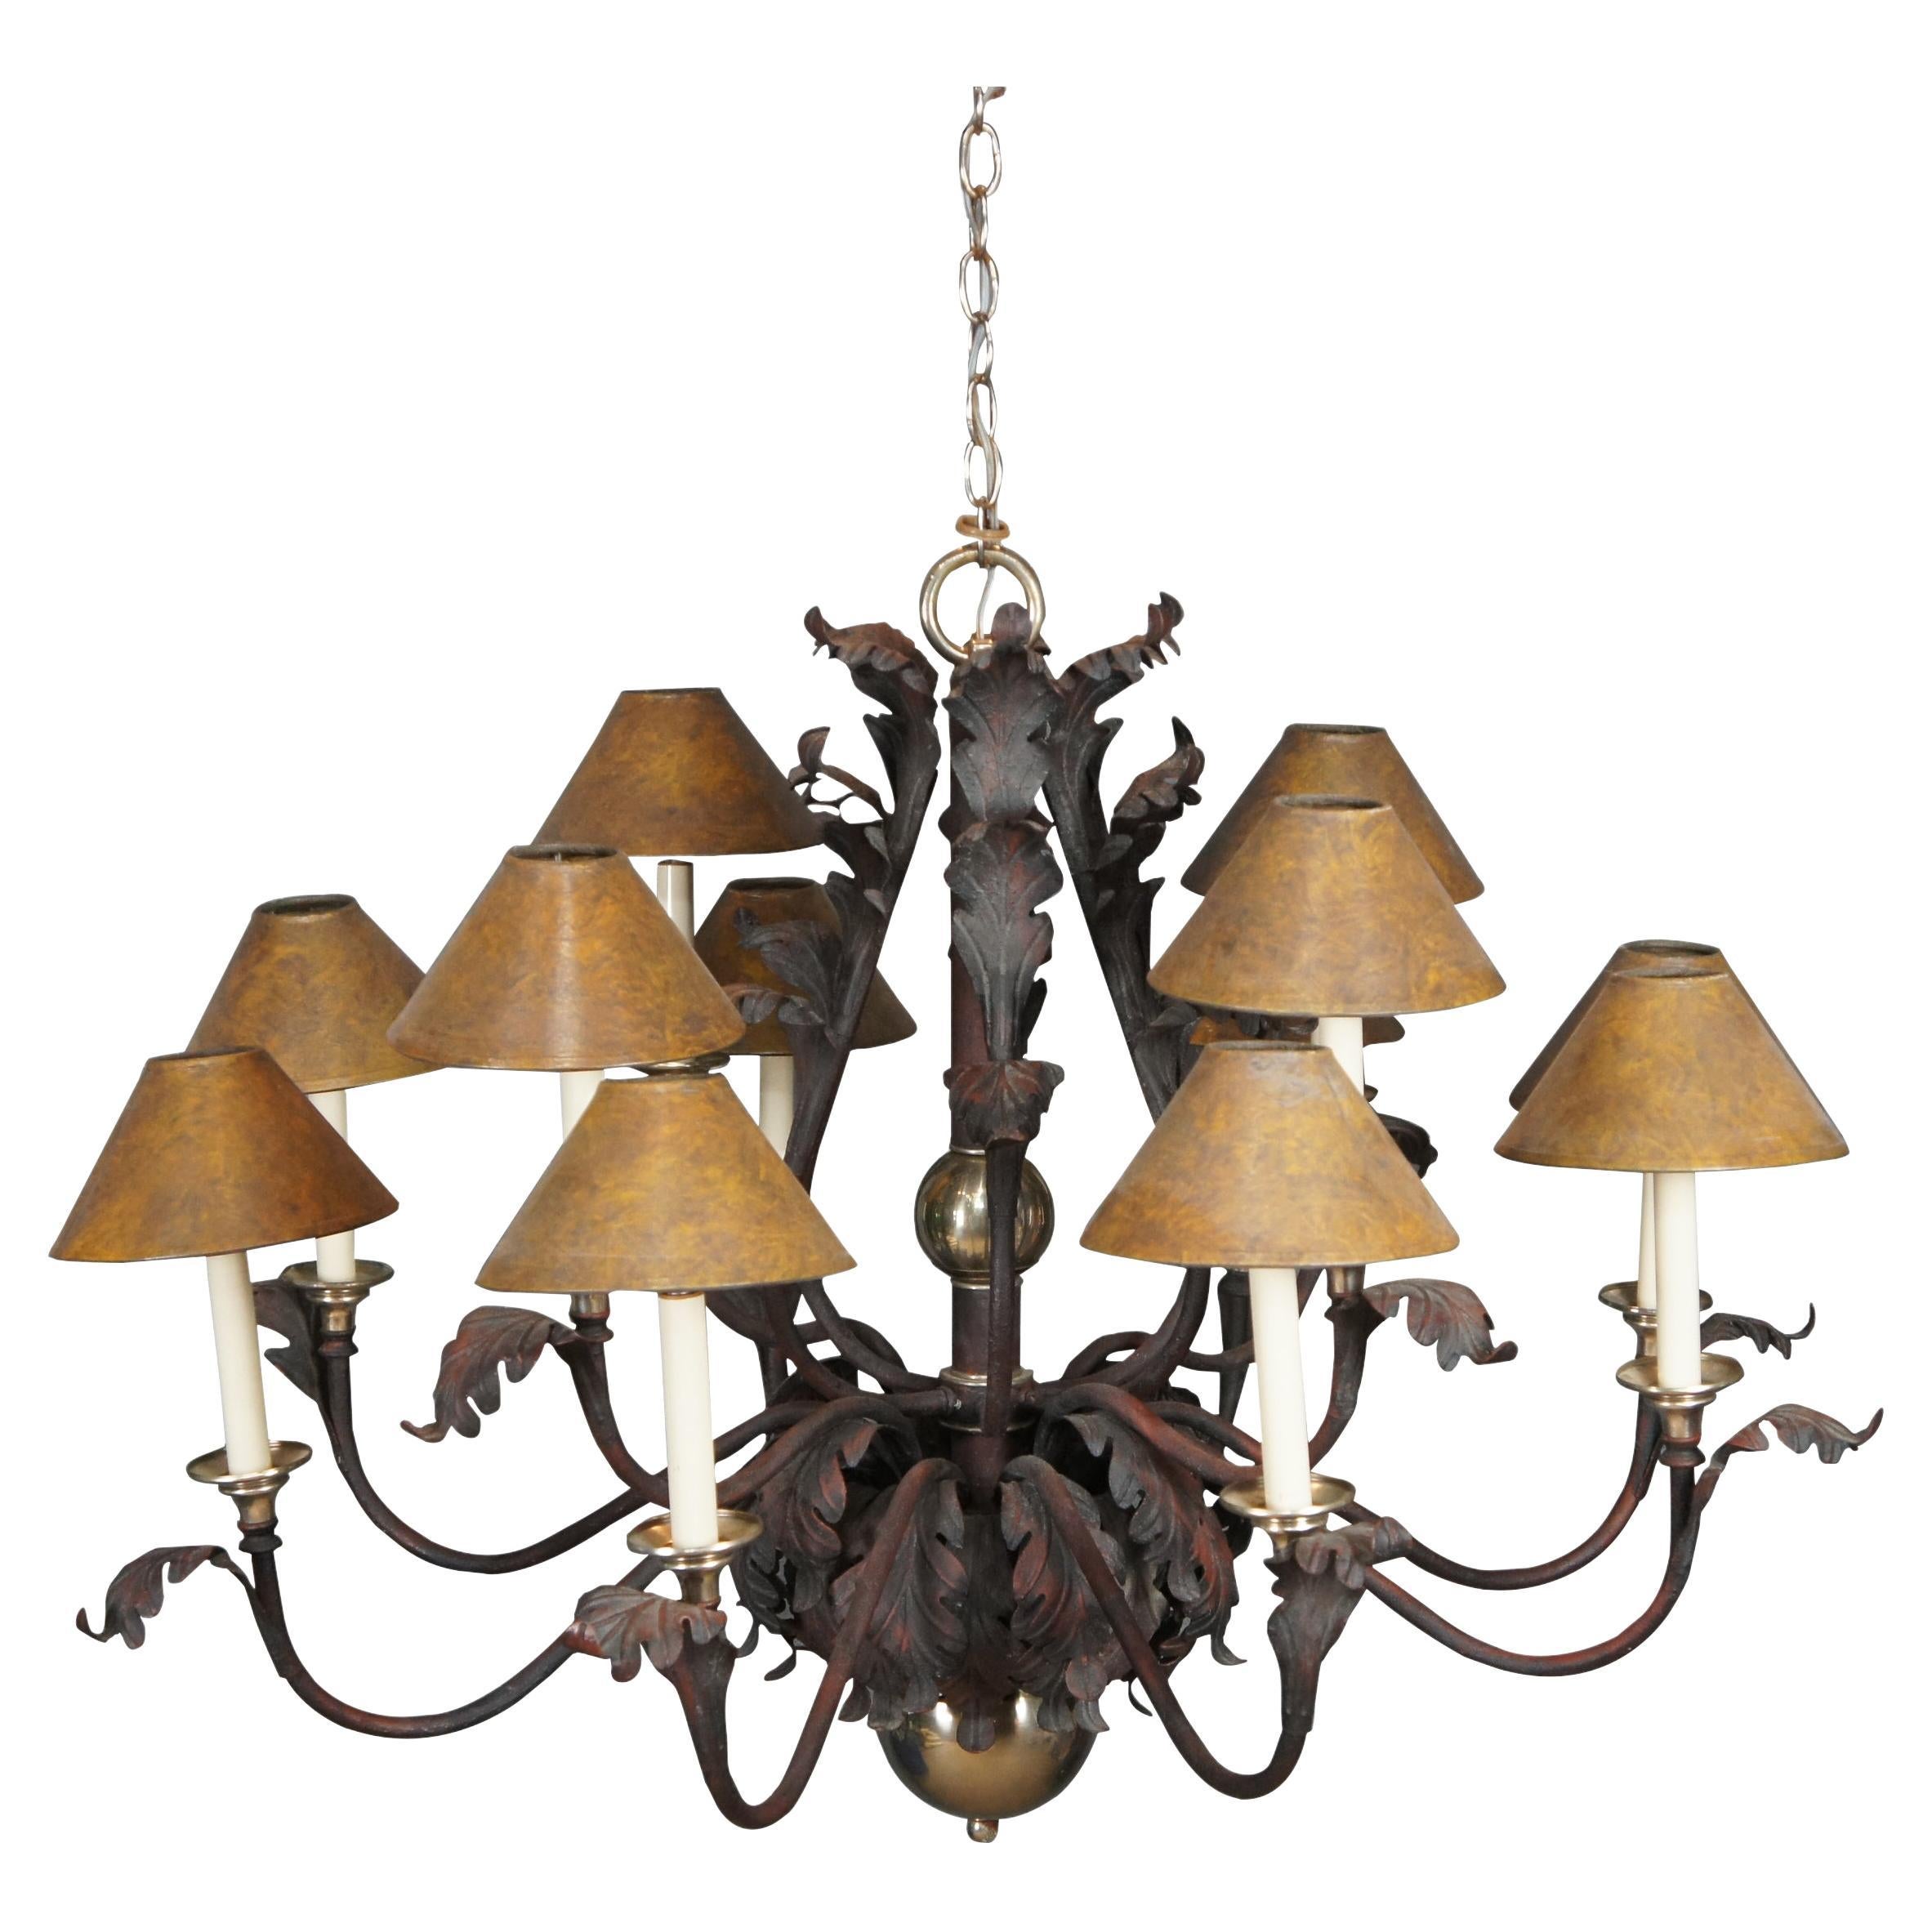 Hart Associates French Scrolled Iron Brass 12 Light Acanthus Leaf Chandelier 44"